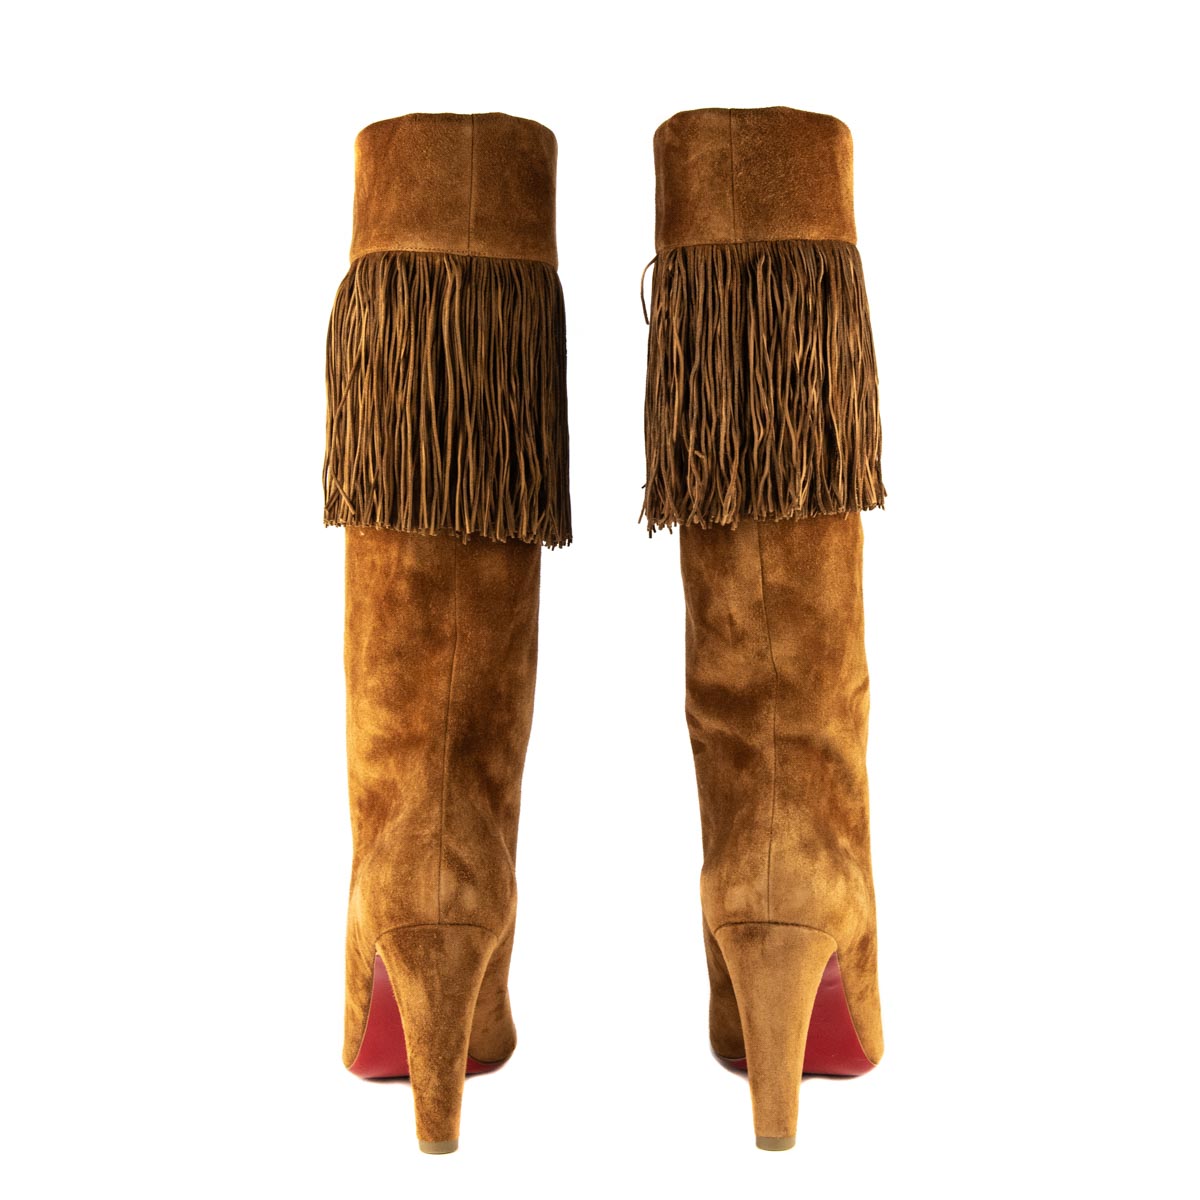 Christian Louboutin Tan Veau Velours Majung 85 Fringe Knee High Boots Size 12 | EU 42 - Love that Bag etc - Preowned Authentic Designer Handbags & Preloved Fashions